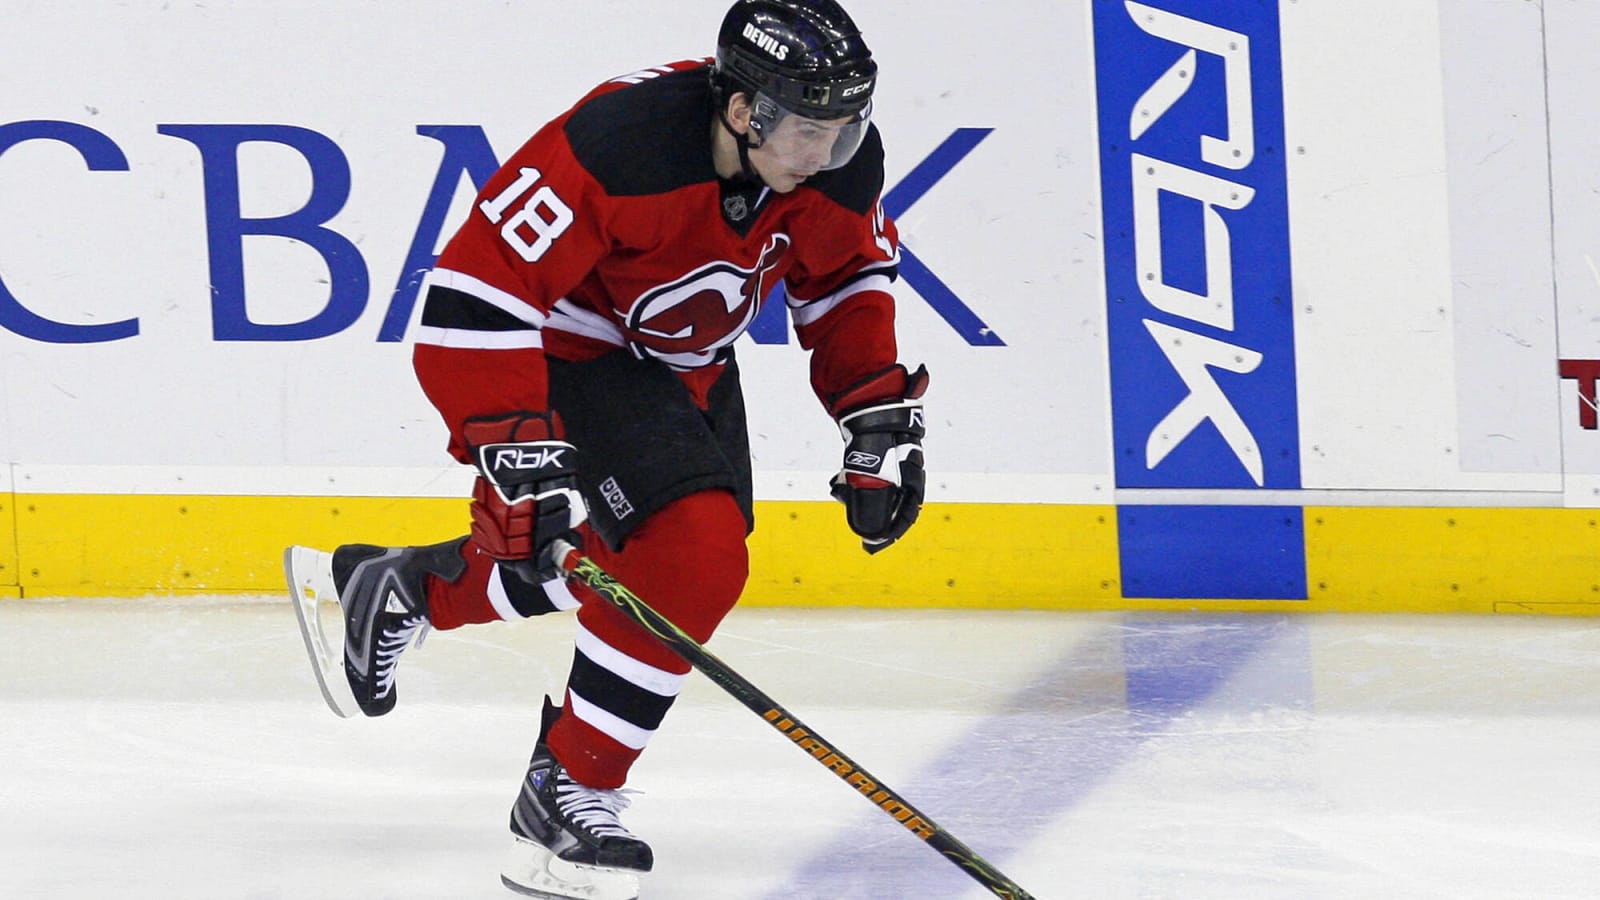 Devils’ Sergei Brylin’s Number Should be Retired